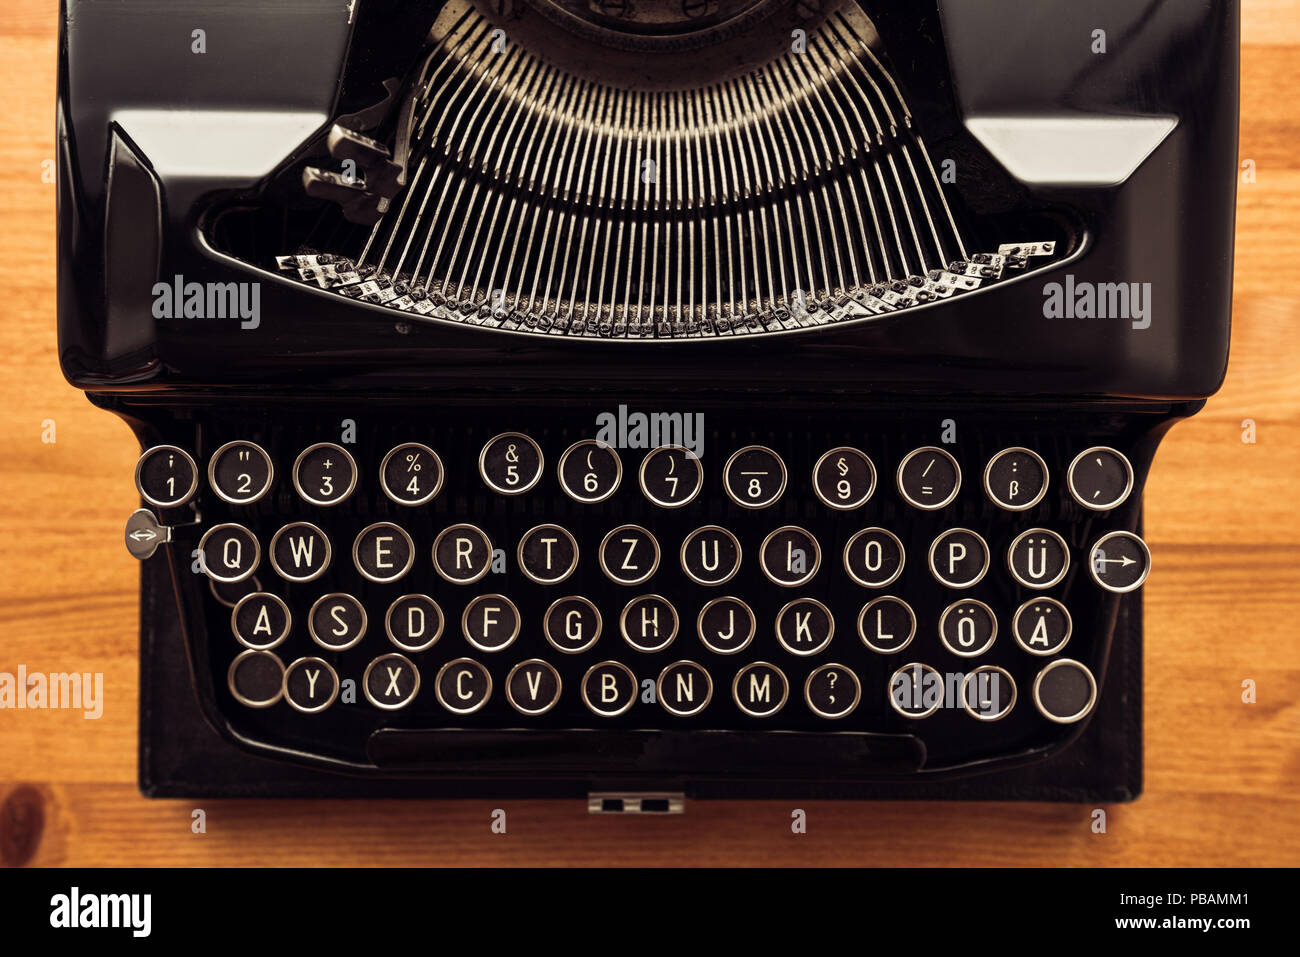 Vintage typewriter machine on writers desk, top view flat lay conceptual image for blogging, publishing, journalism or poetry writing. Stock Photo